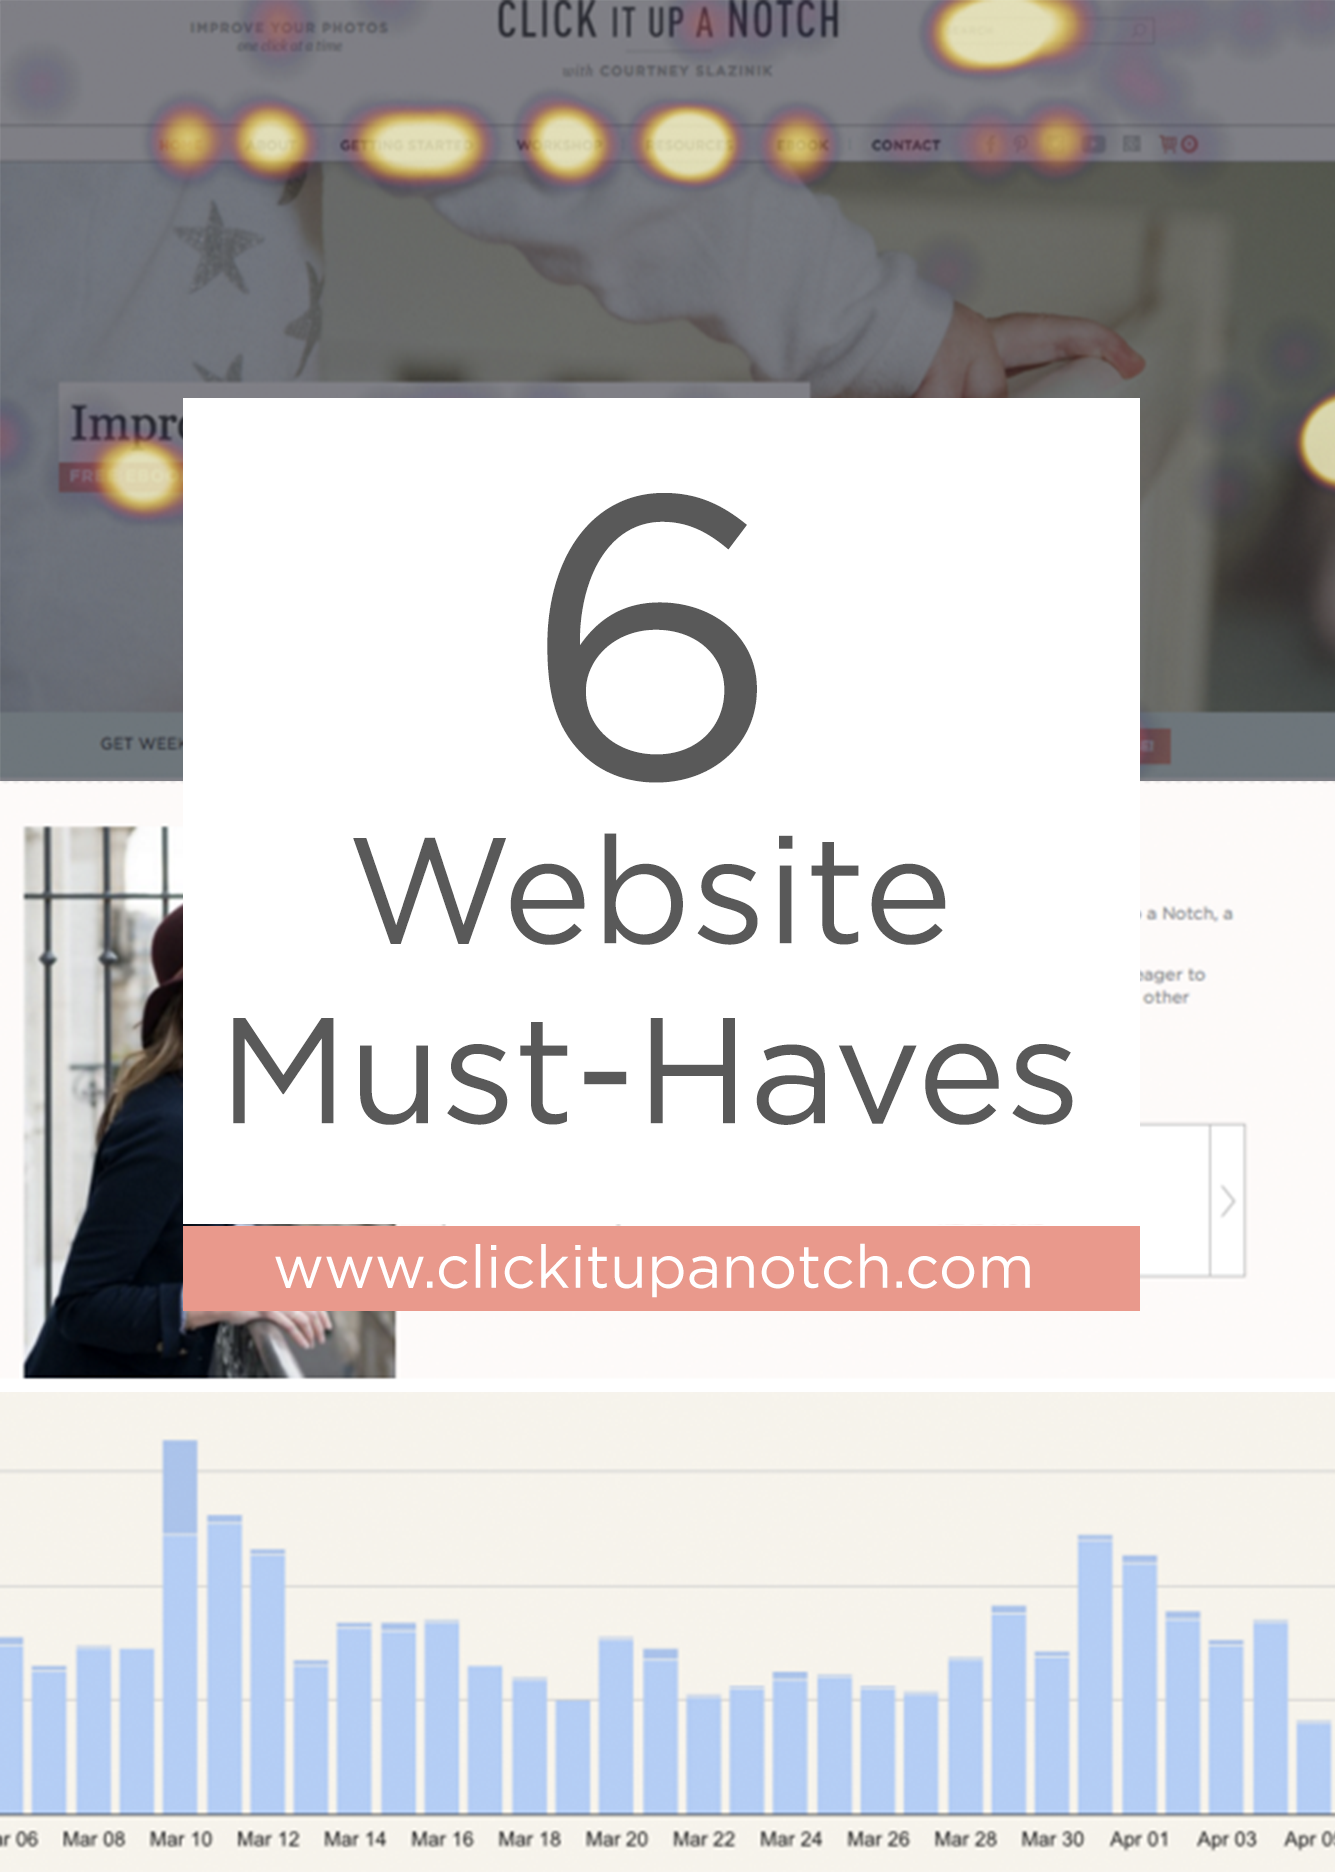 6 Website Must-Haves - I never knew about #2. Wow! Installing this today!